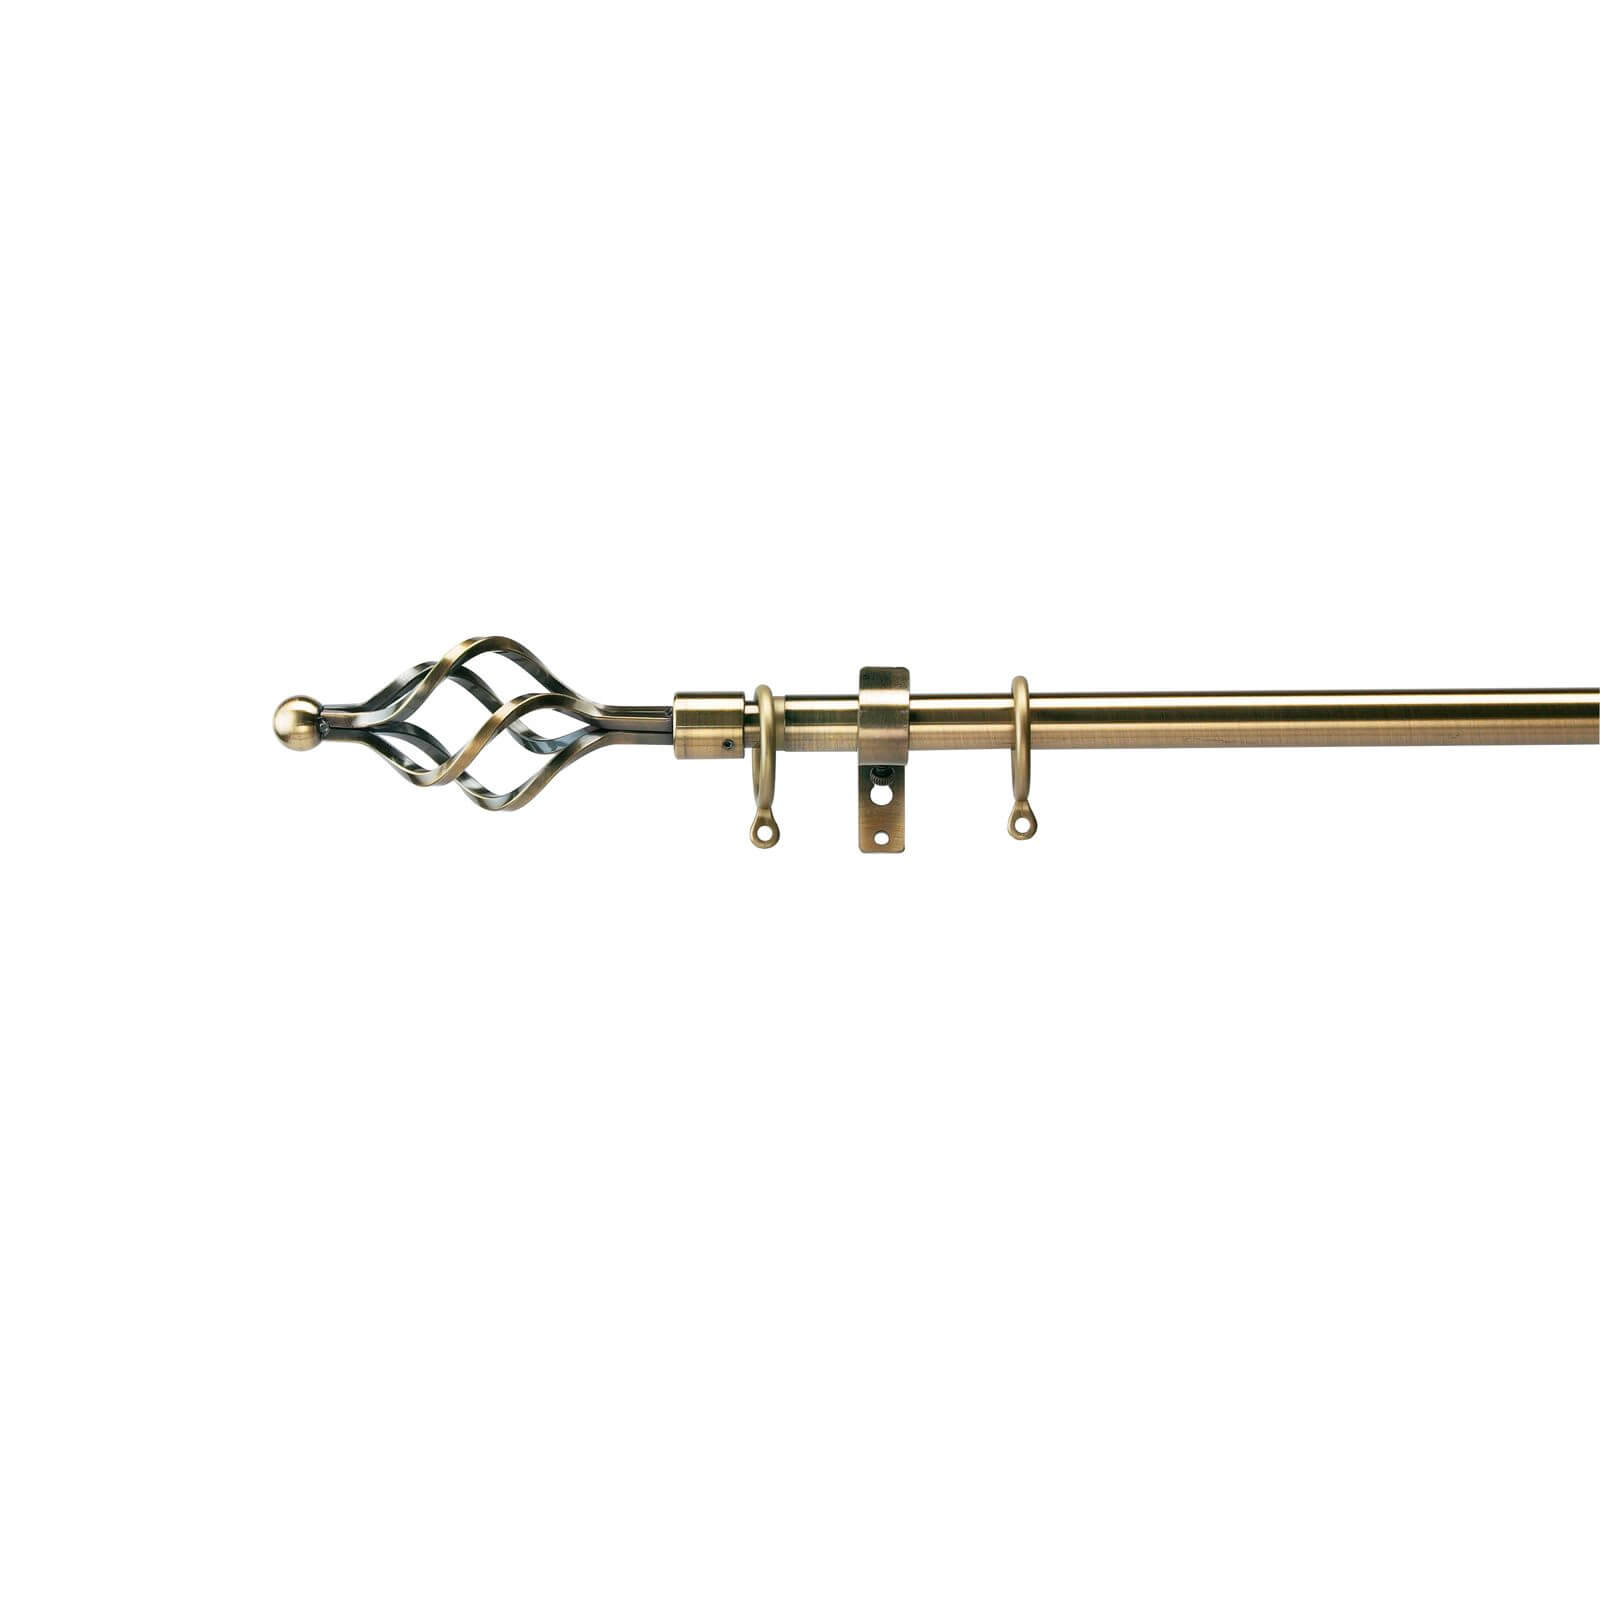 Photo of Extendable Cage Finial Curtain Pole - Antique Brass - 1.7-3m -16/19mm-